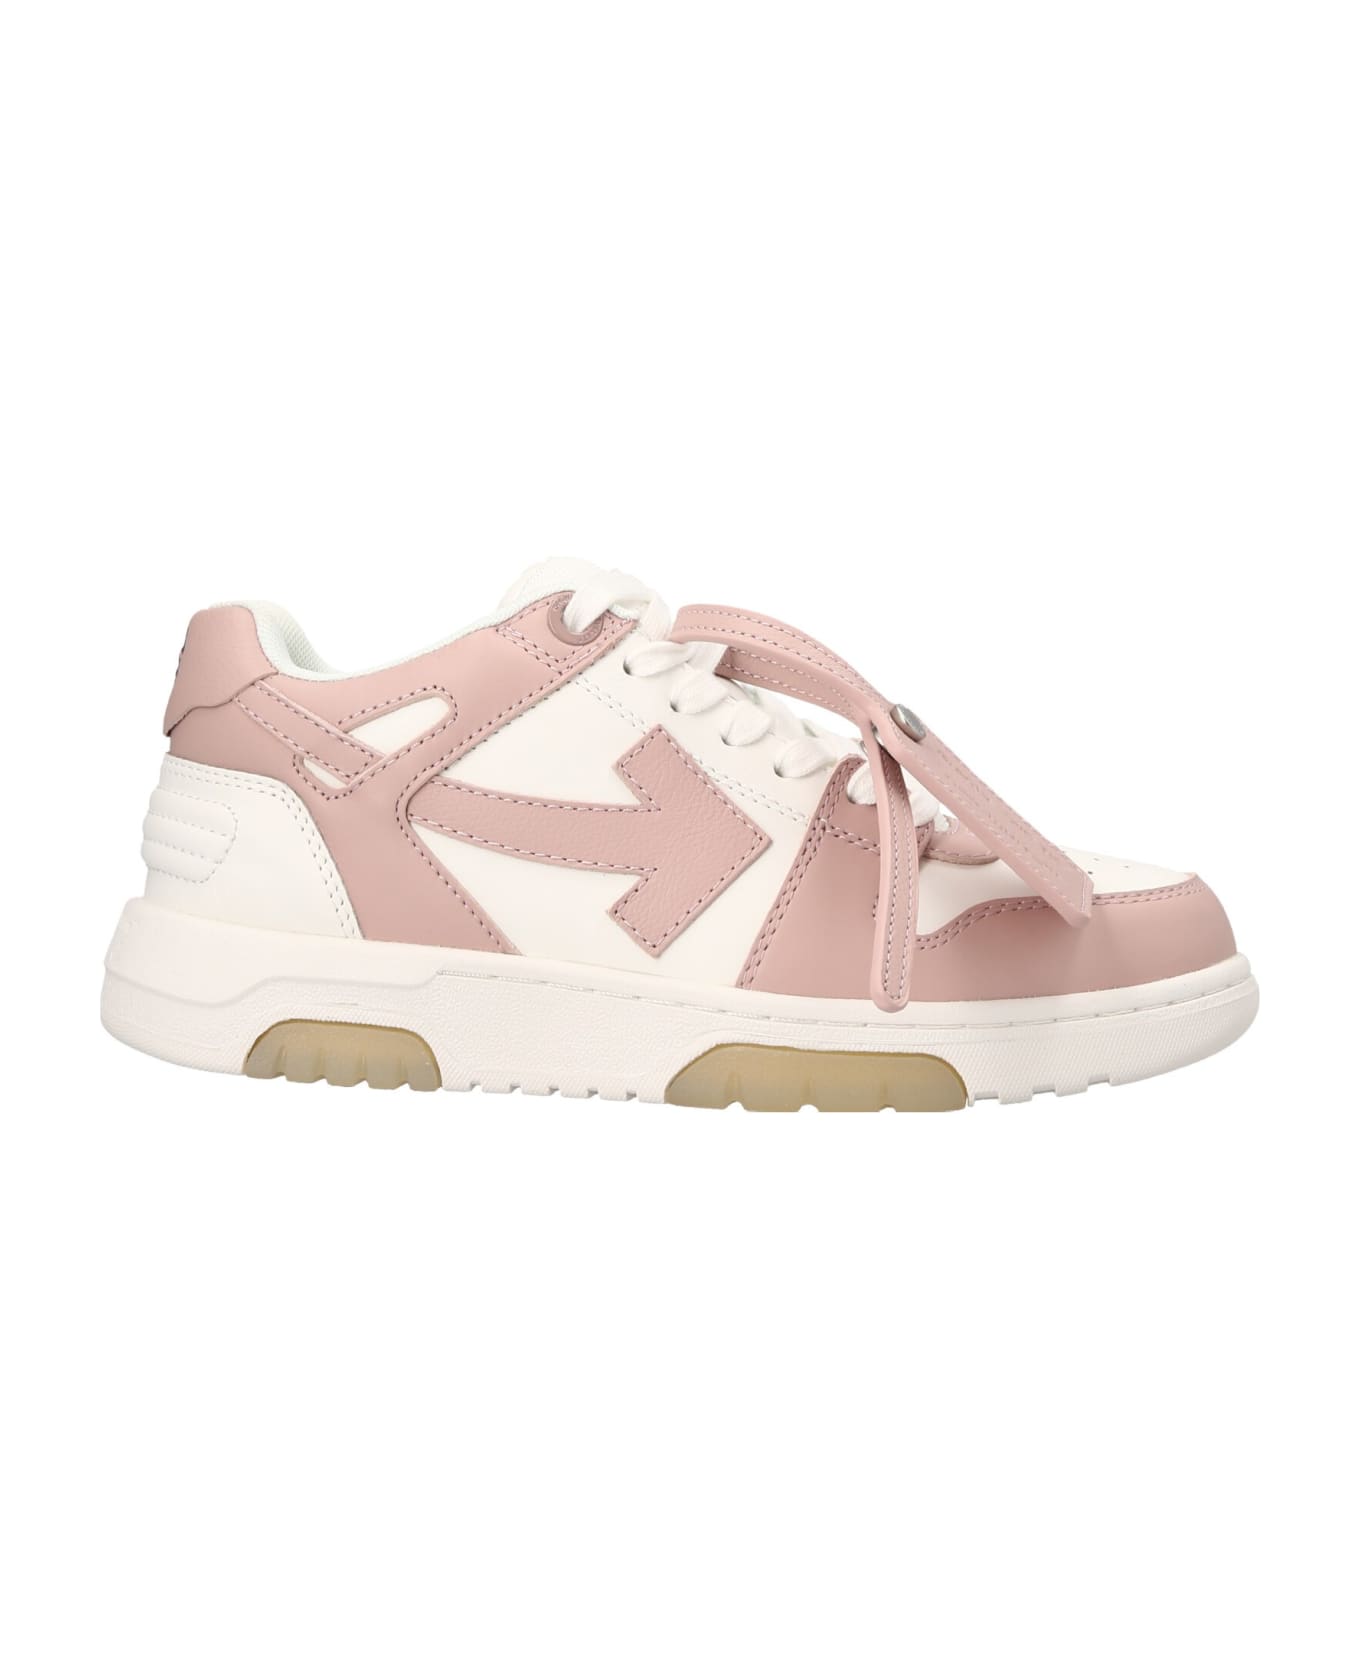 Off-White Eyu 'out Of Office' Sneakers - Pink